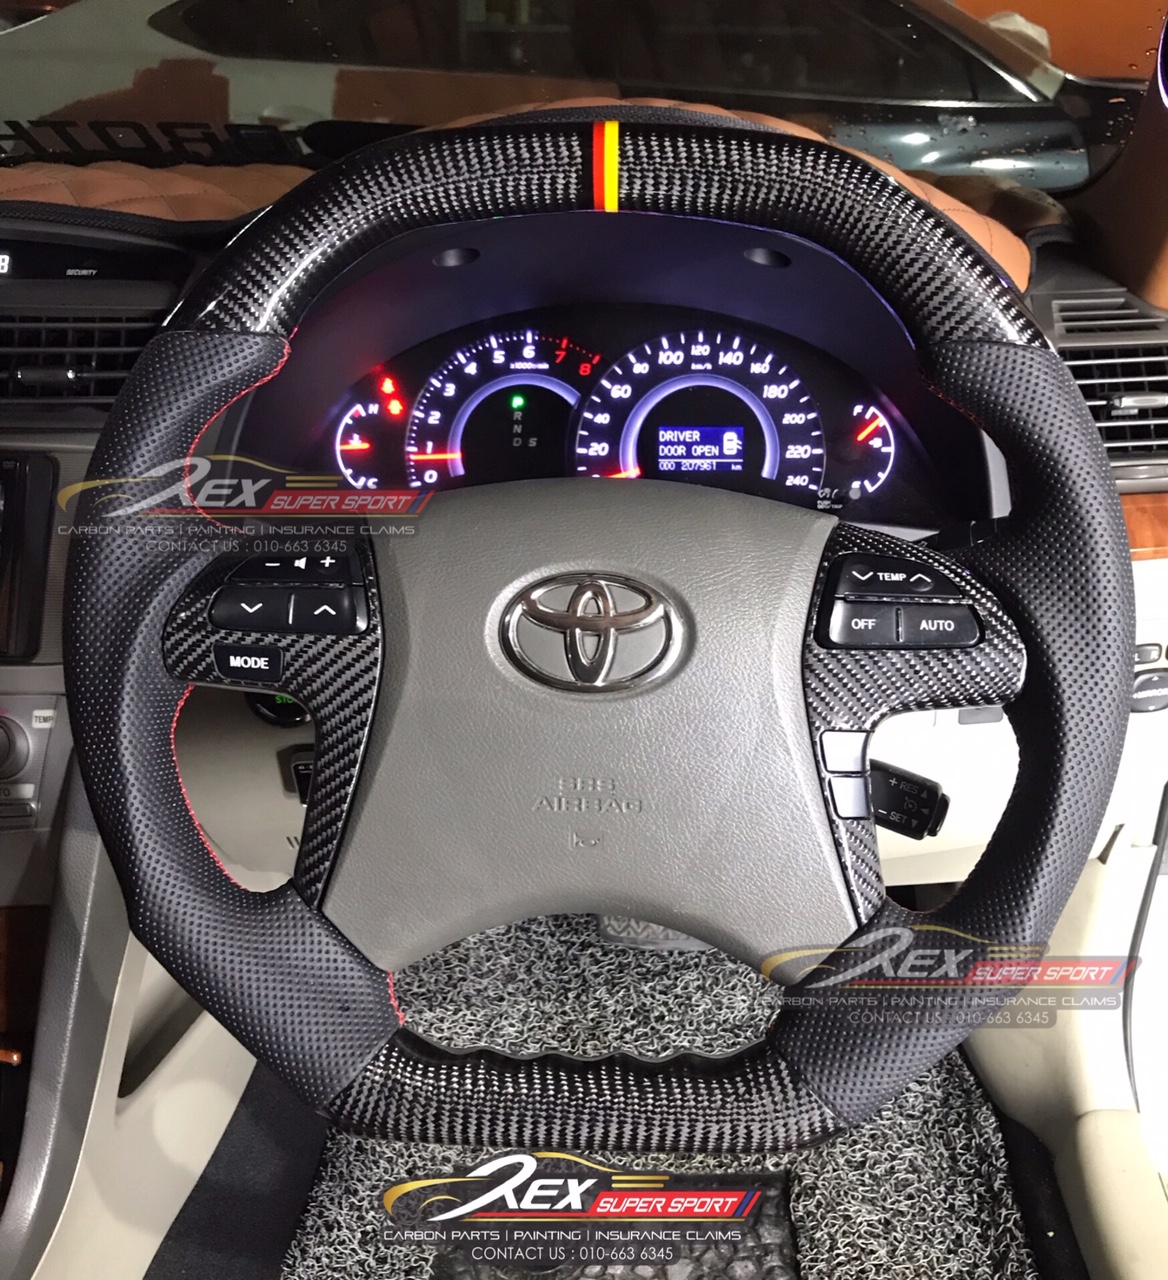 Toyota Camry Carbon Steering Rexsupersport Specializes In Providing